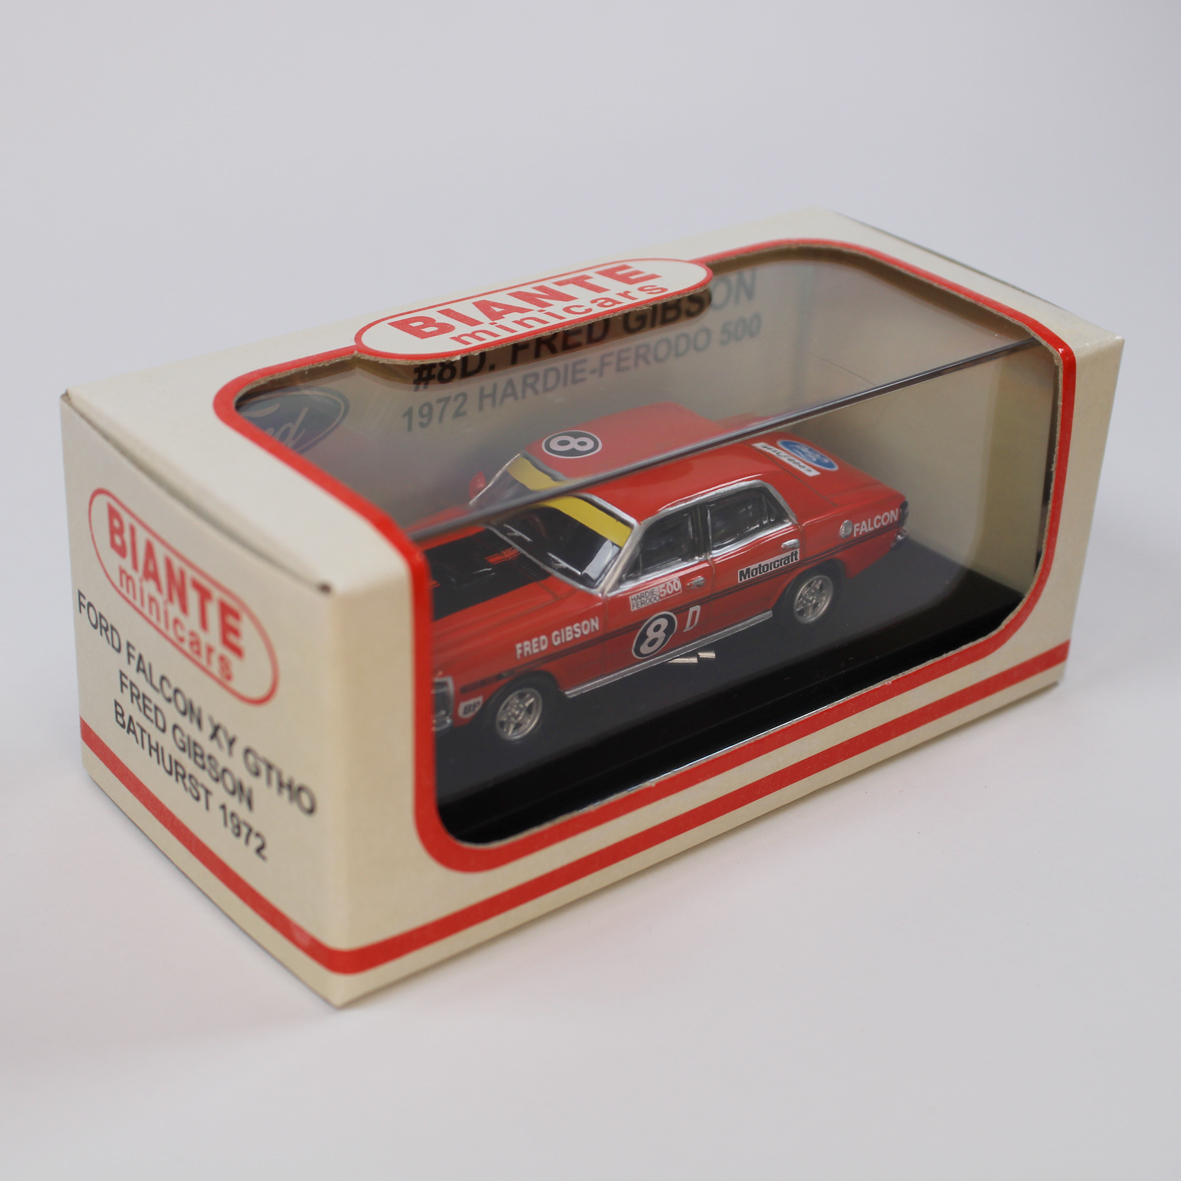 Biante Model Cars,1:64 Scale #8D Fred Gibson Ford XY Falcon Bathurst '72 Biante Minicars